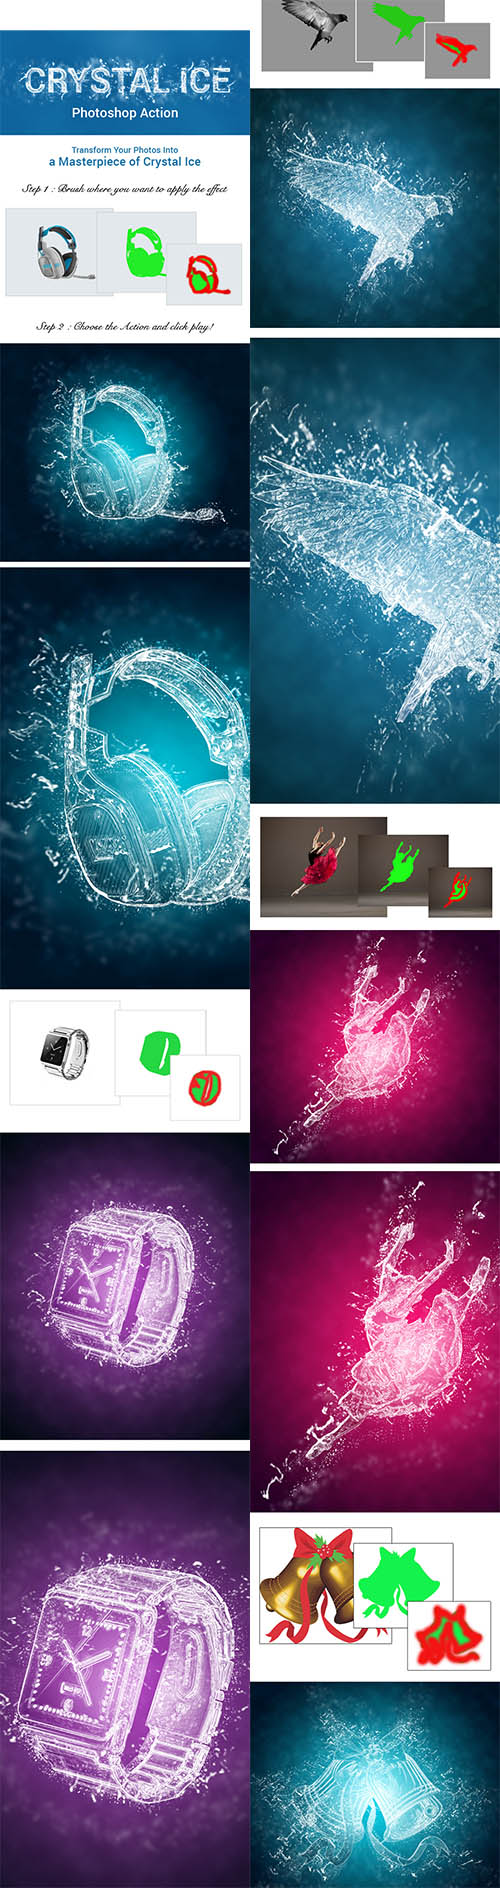 GraphicRiver - Crystal Ice Photoshop Action 11083870